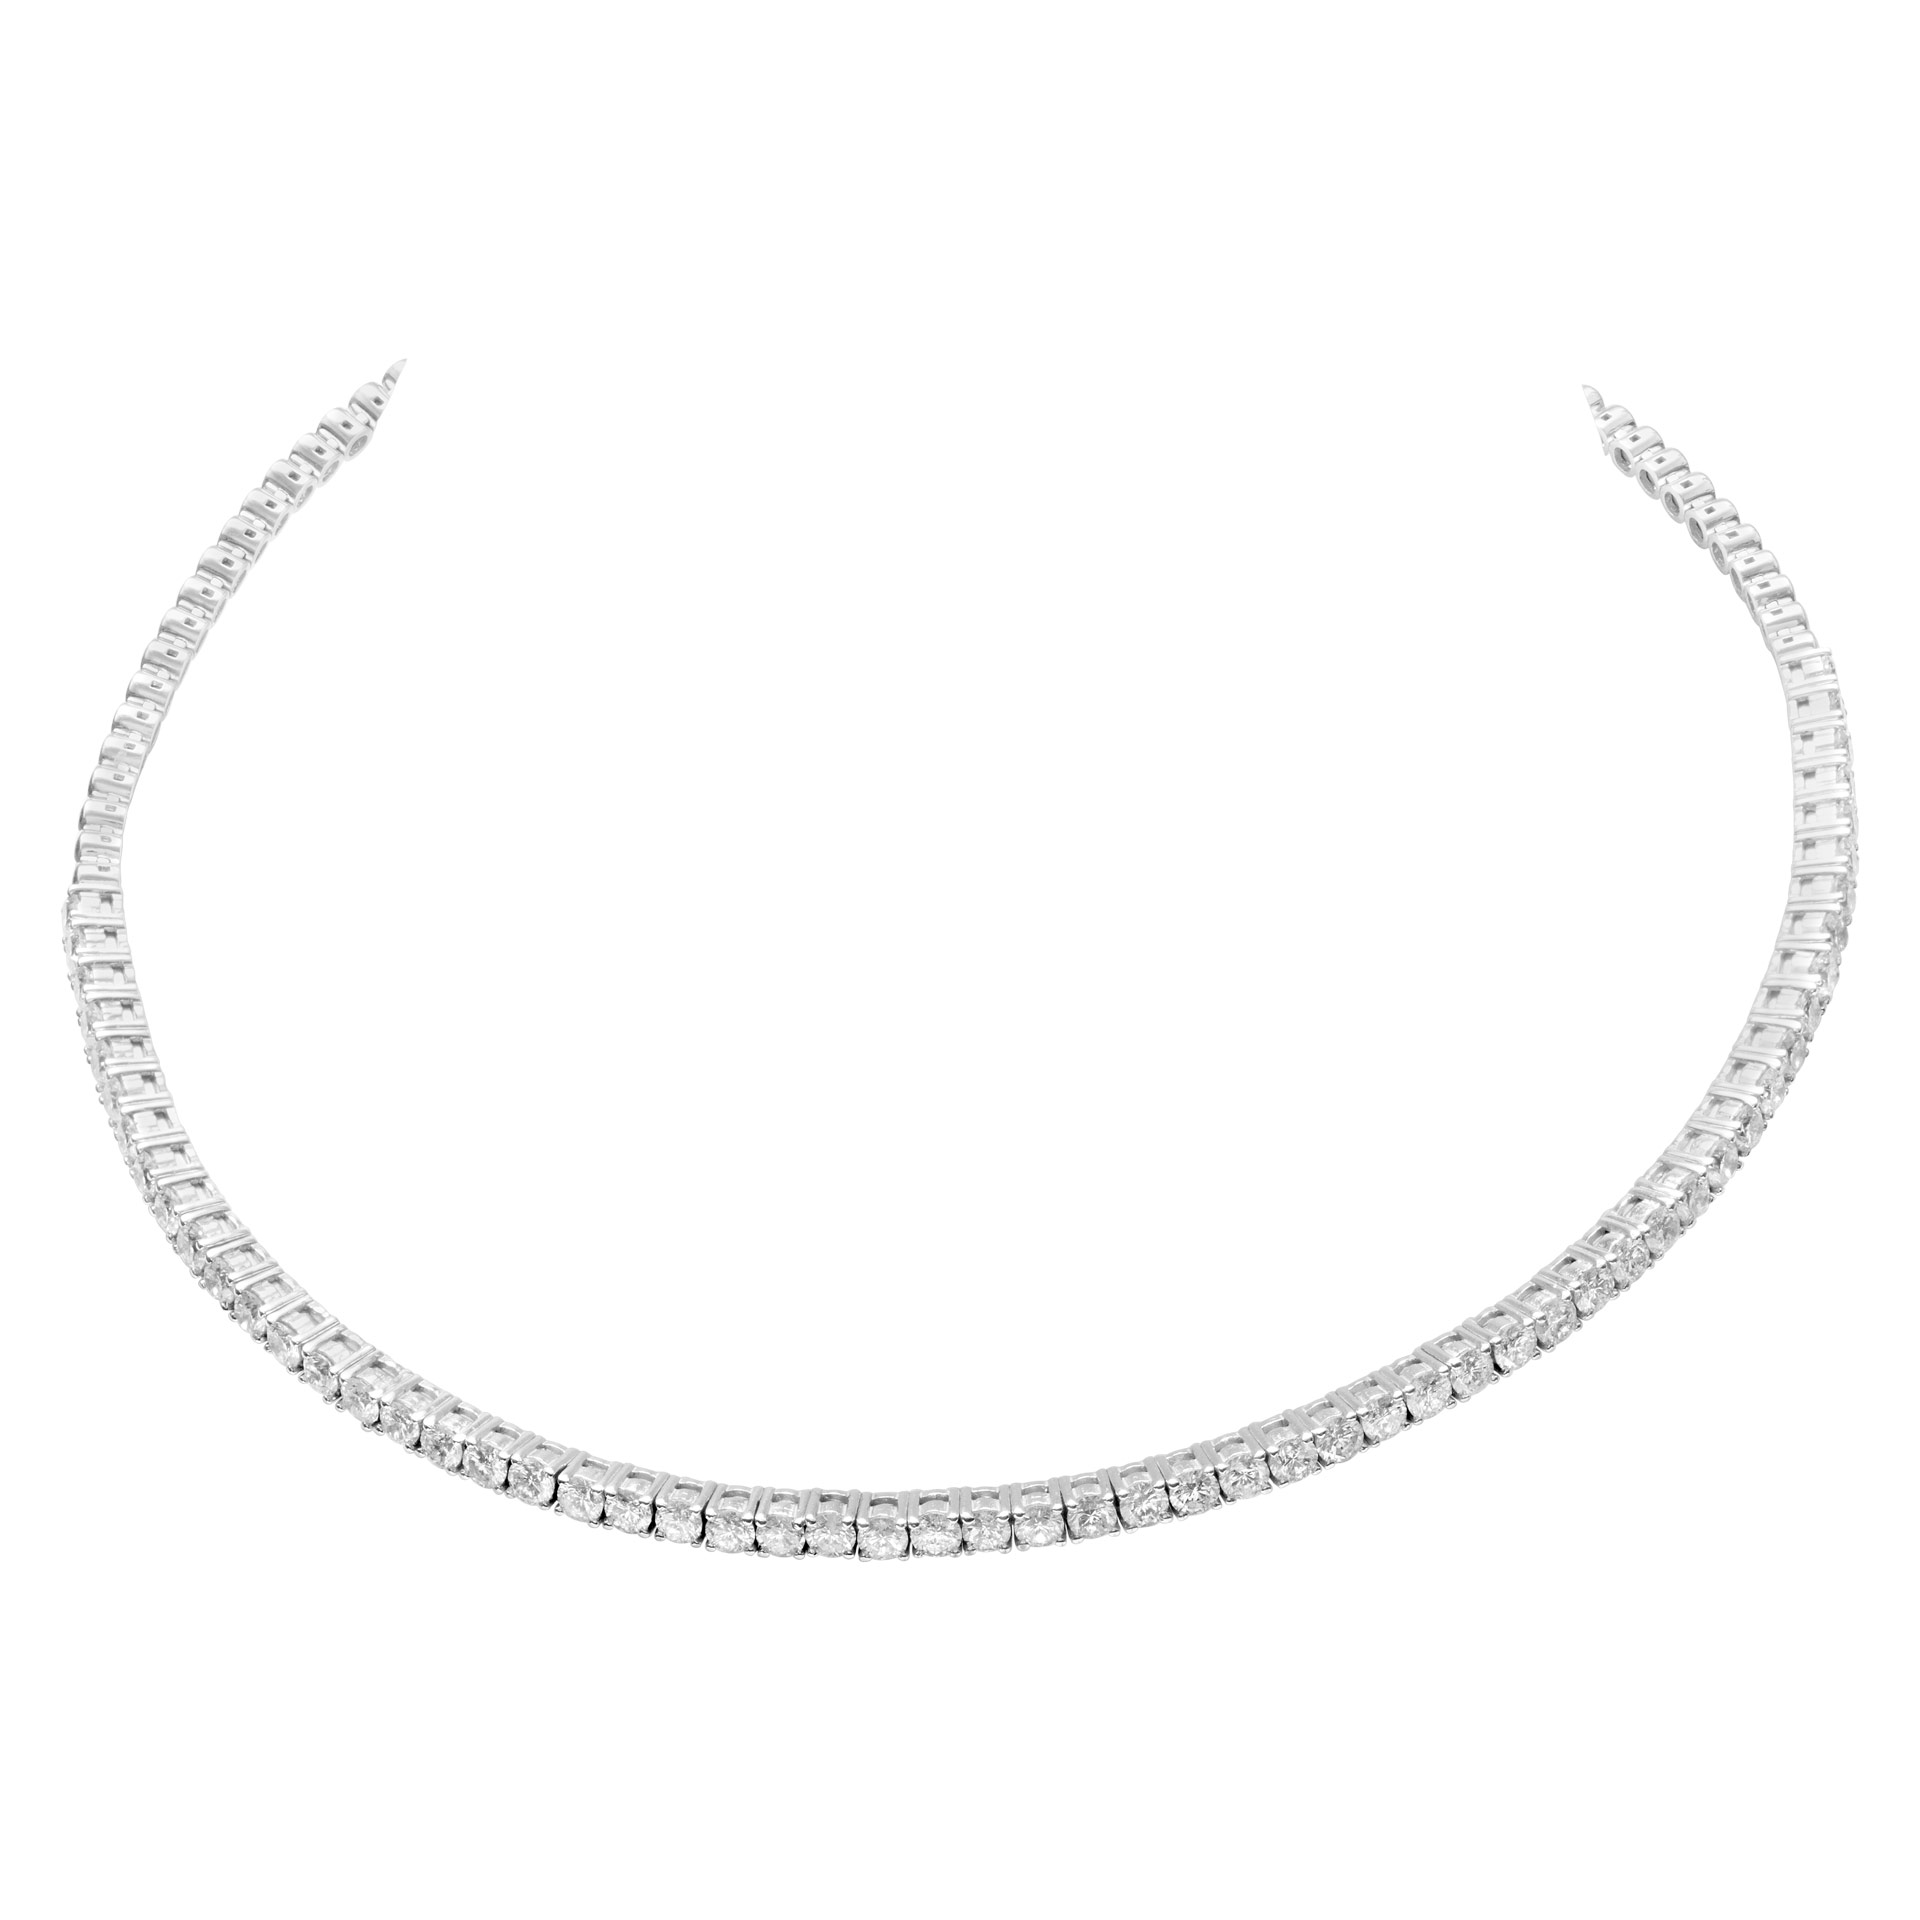 Sparkling diamond choker necklace in 8.39 carats of white clean diamonds image 2